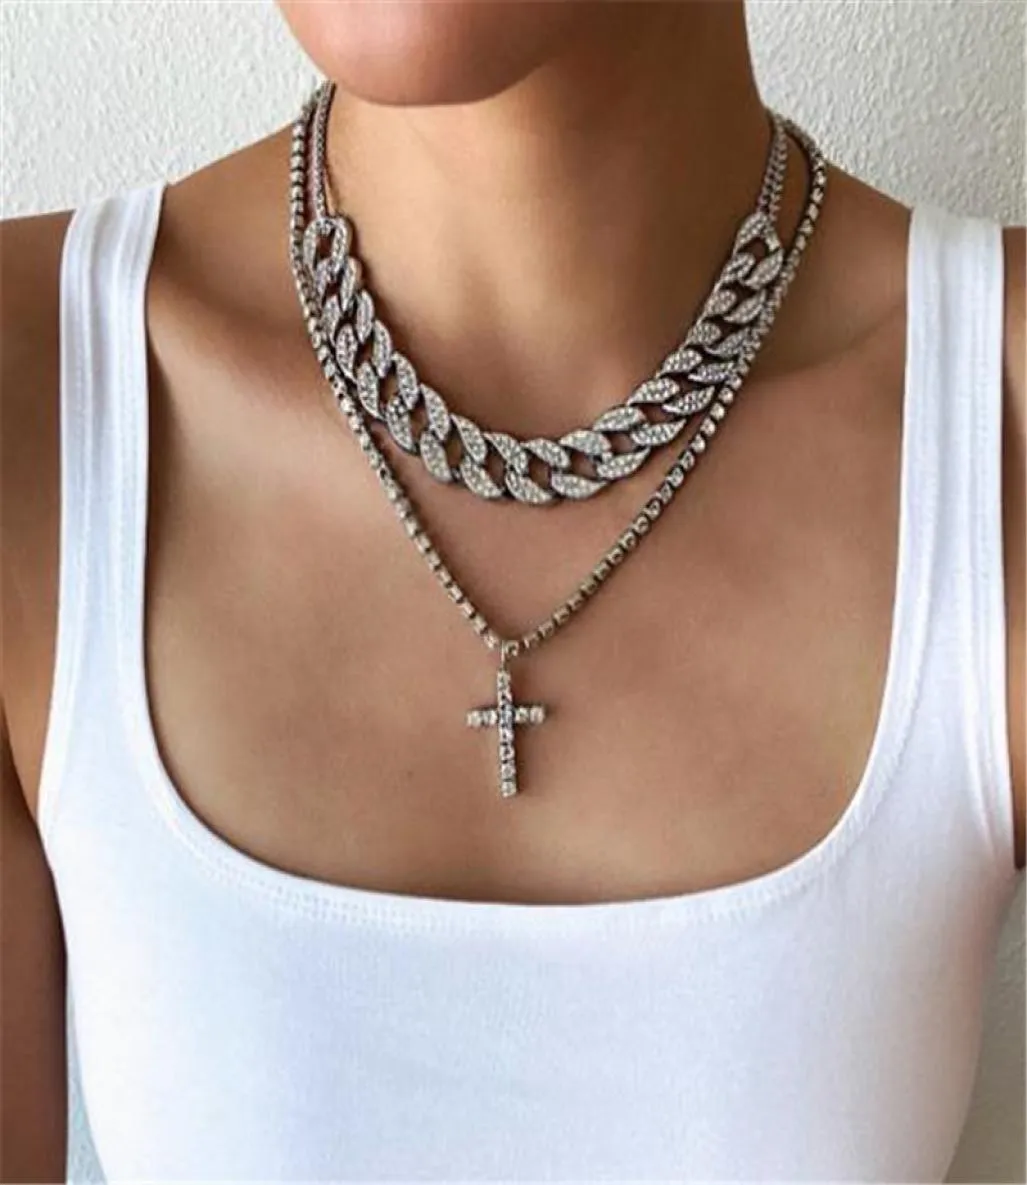 Hip Hop Cuban Link Chain Choker necklace set Iced Out pendant necklace Jewelry Women Men Hiphop Bling Luxury Jewellery9772588